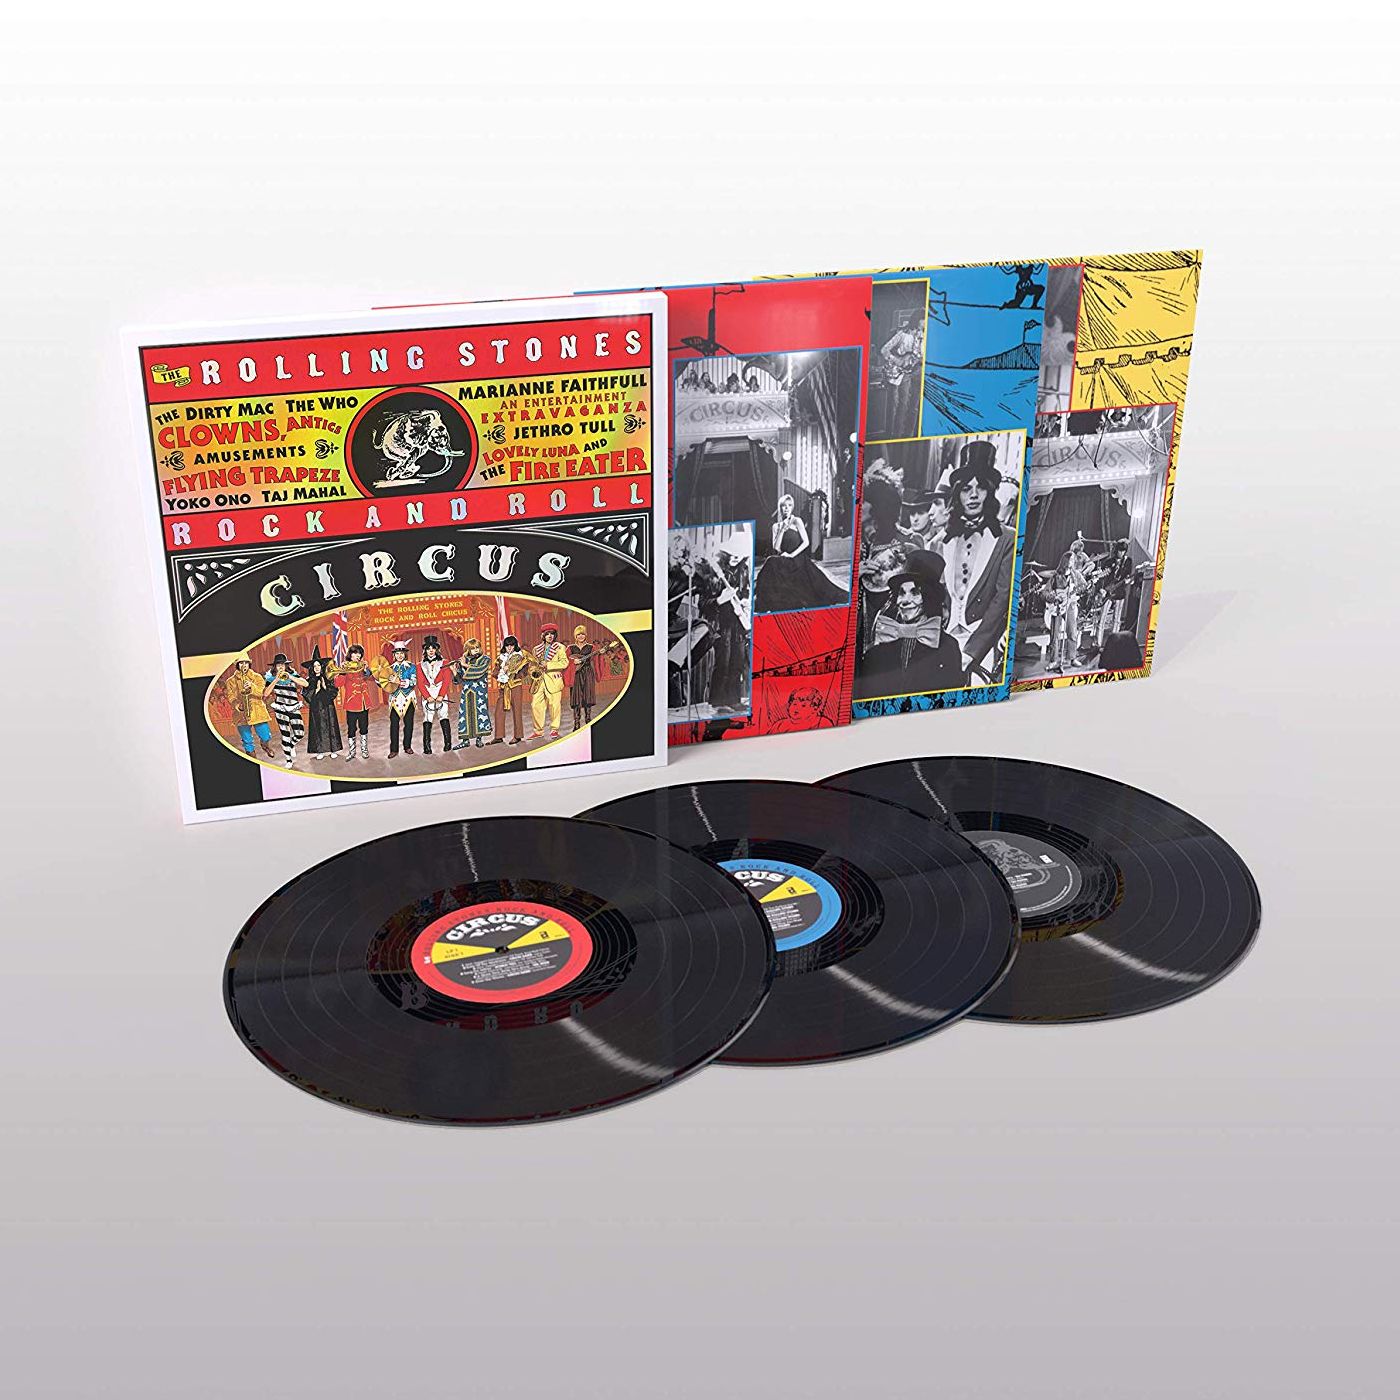 ROLLING STONES / ローリング・ストーンズ / ROCK AND ROLL CIRCUS (180G 3LP)